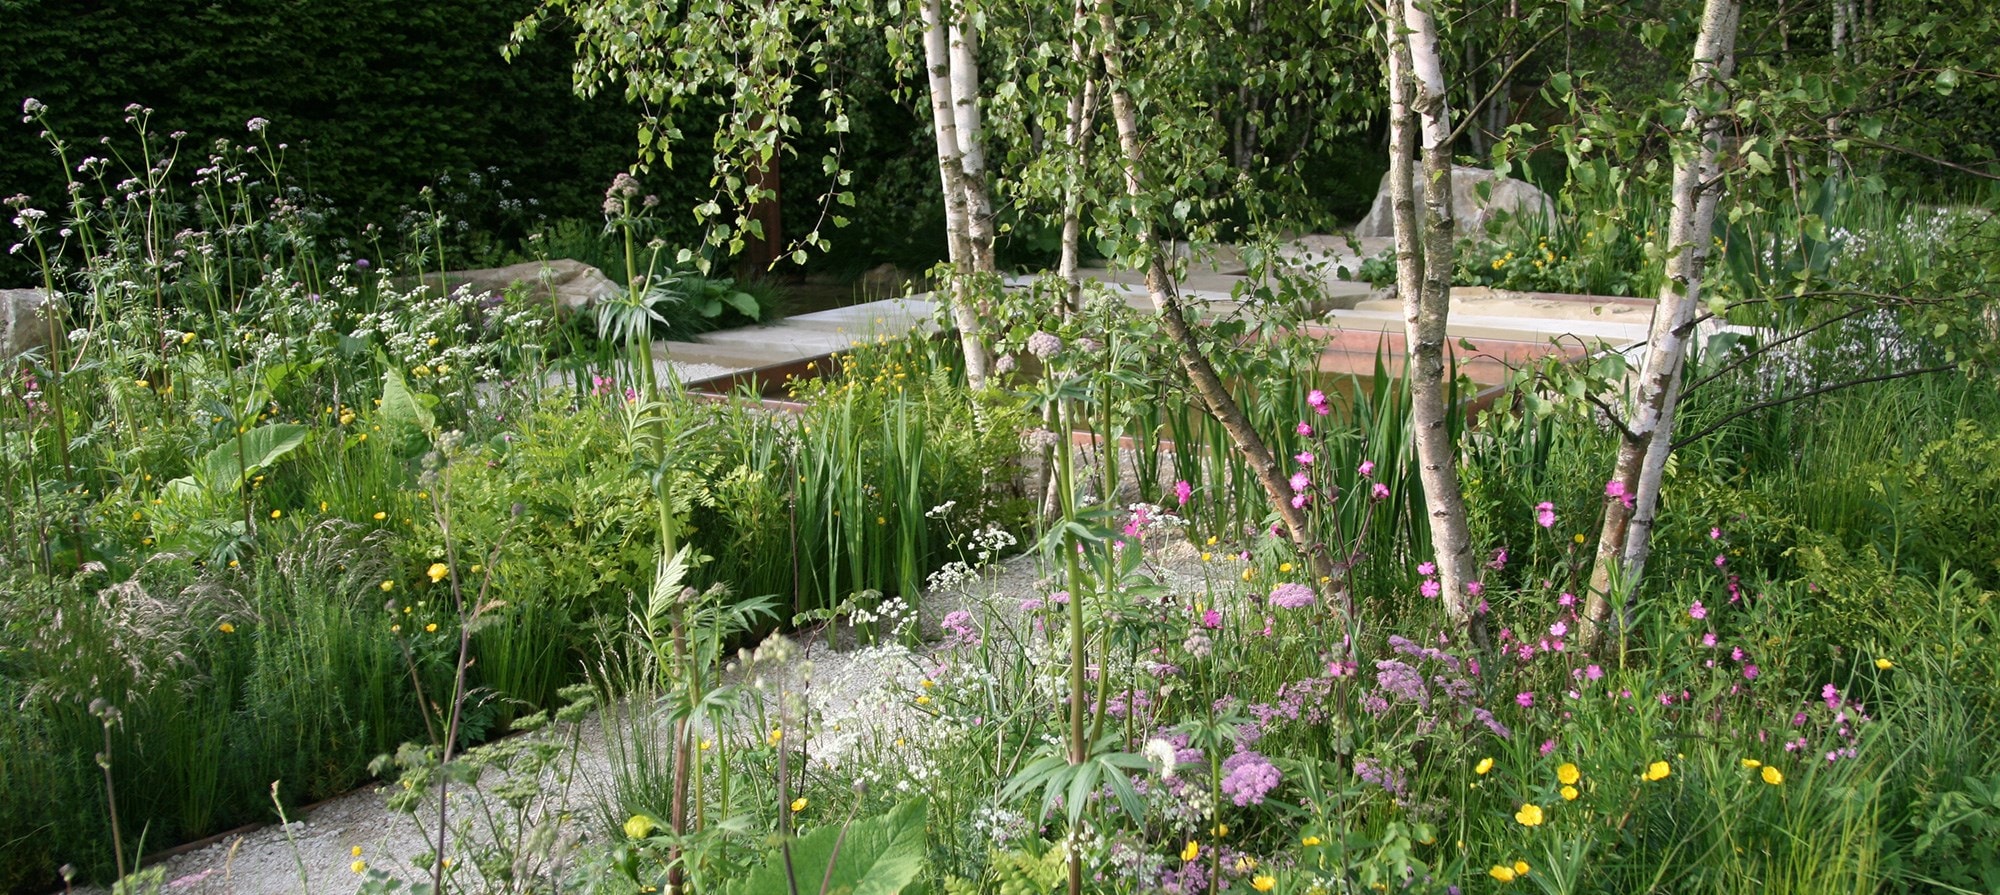 The Daily Telegraph Garden designed by Sarah Price